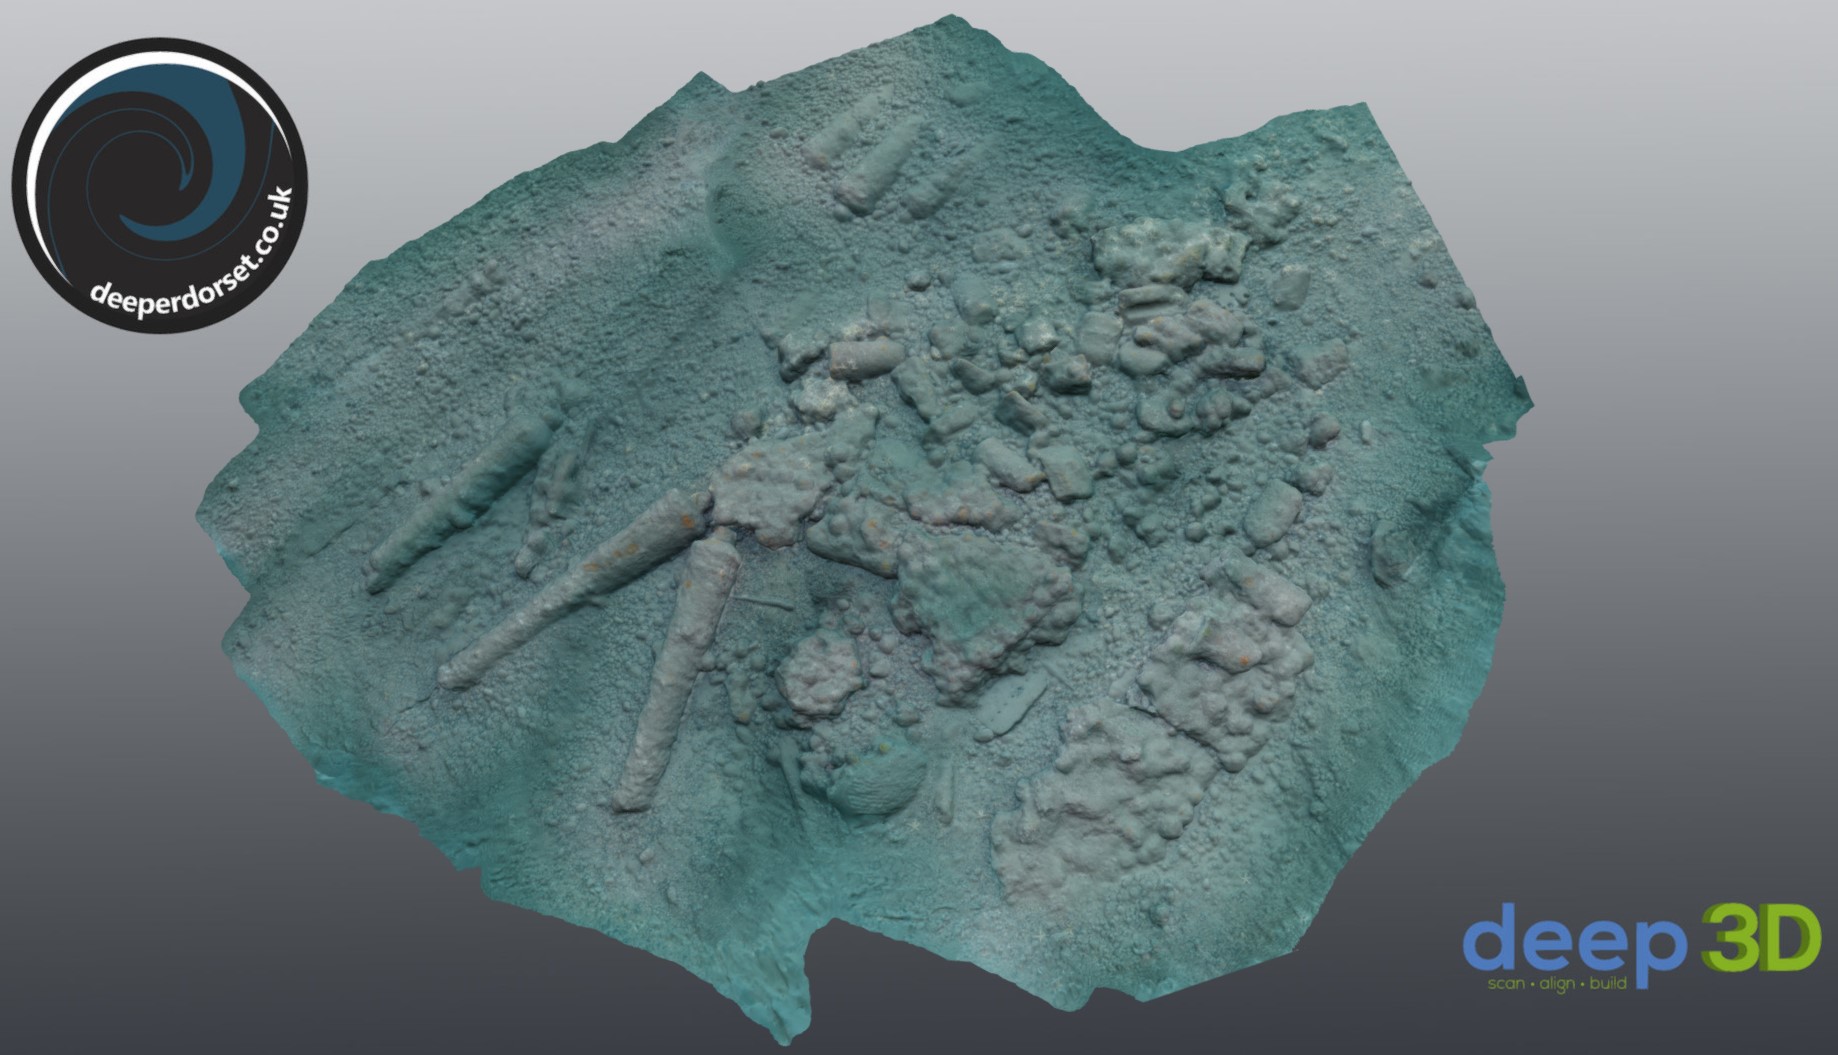 Image of photogrammetry model of the Chesil Beach Cannon Inshore Site created by Simon Brown on Sketchfab